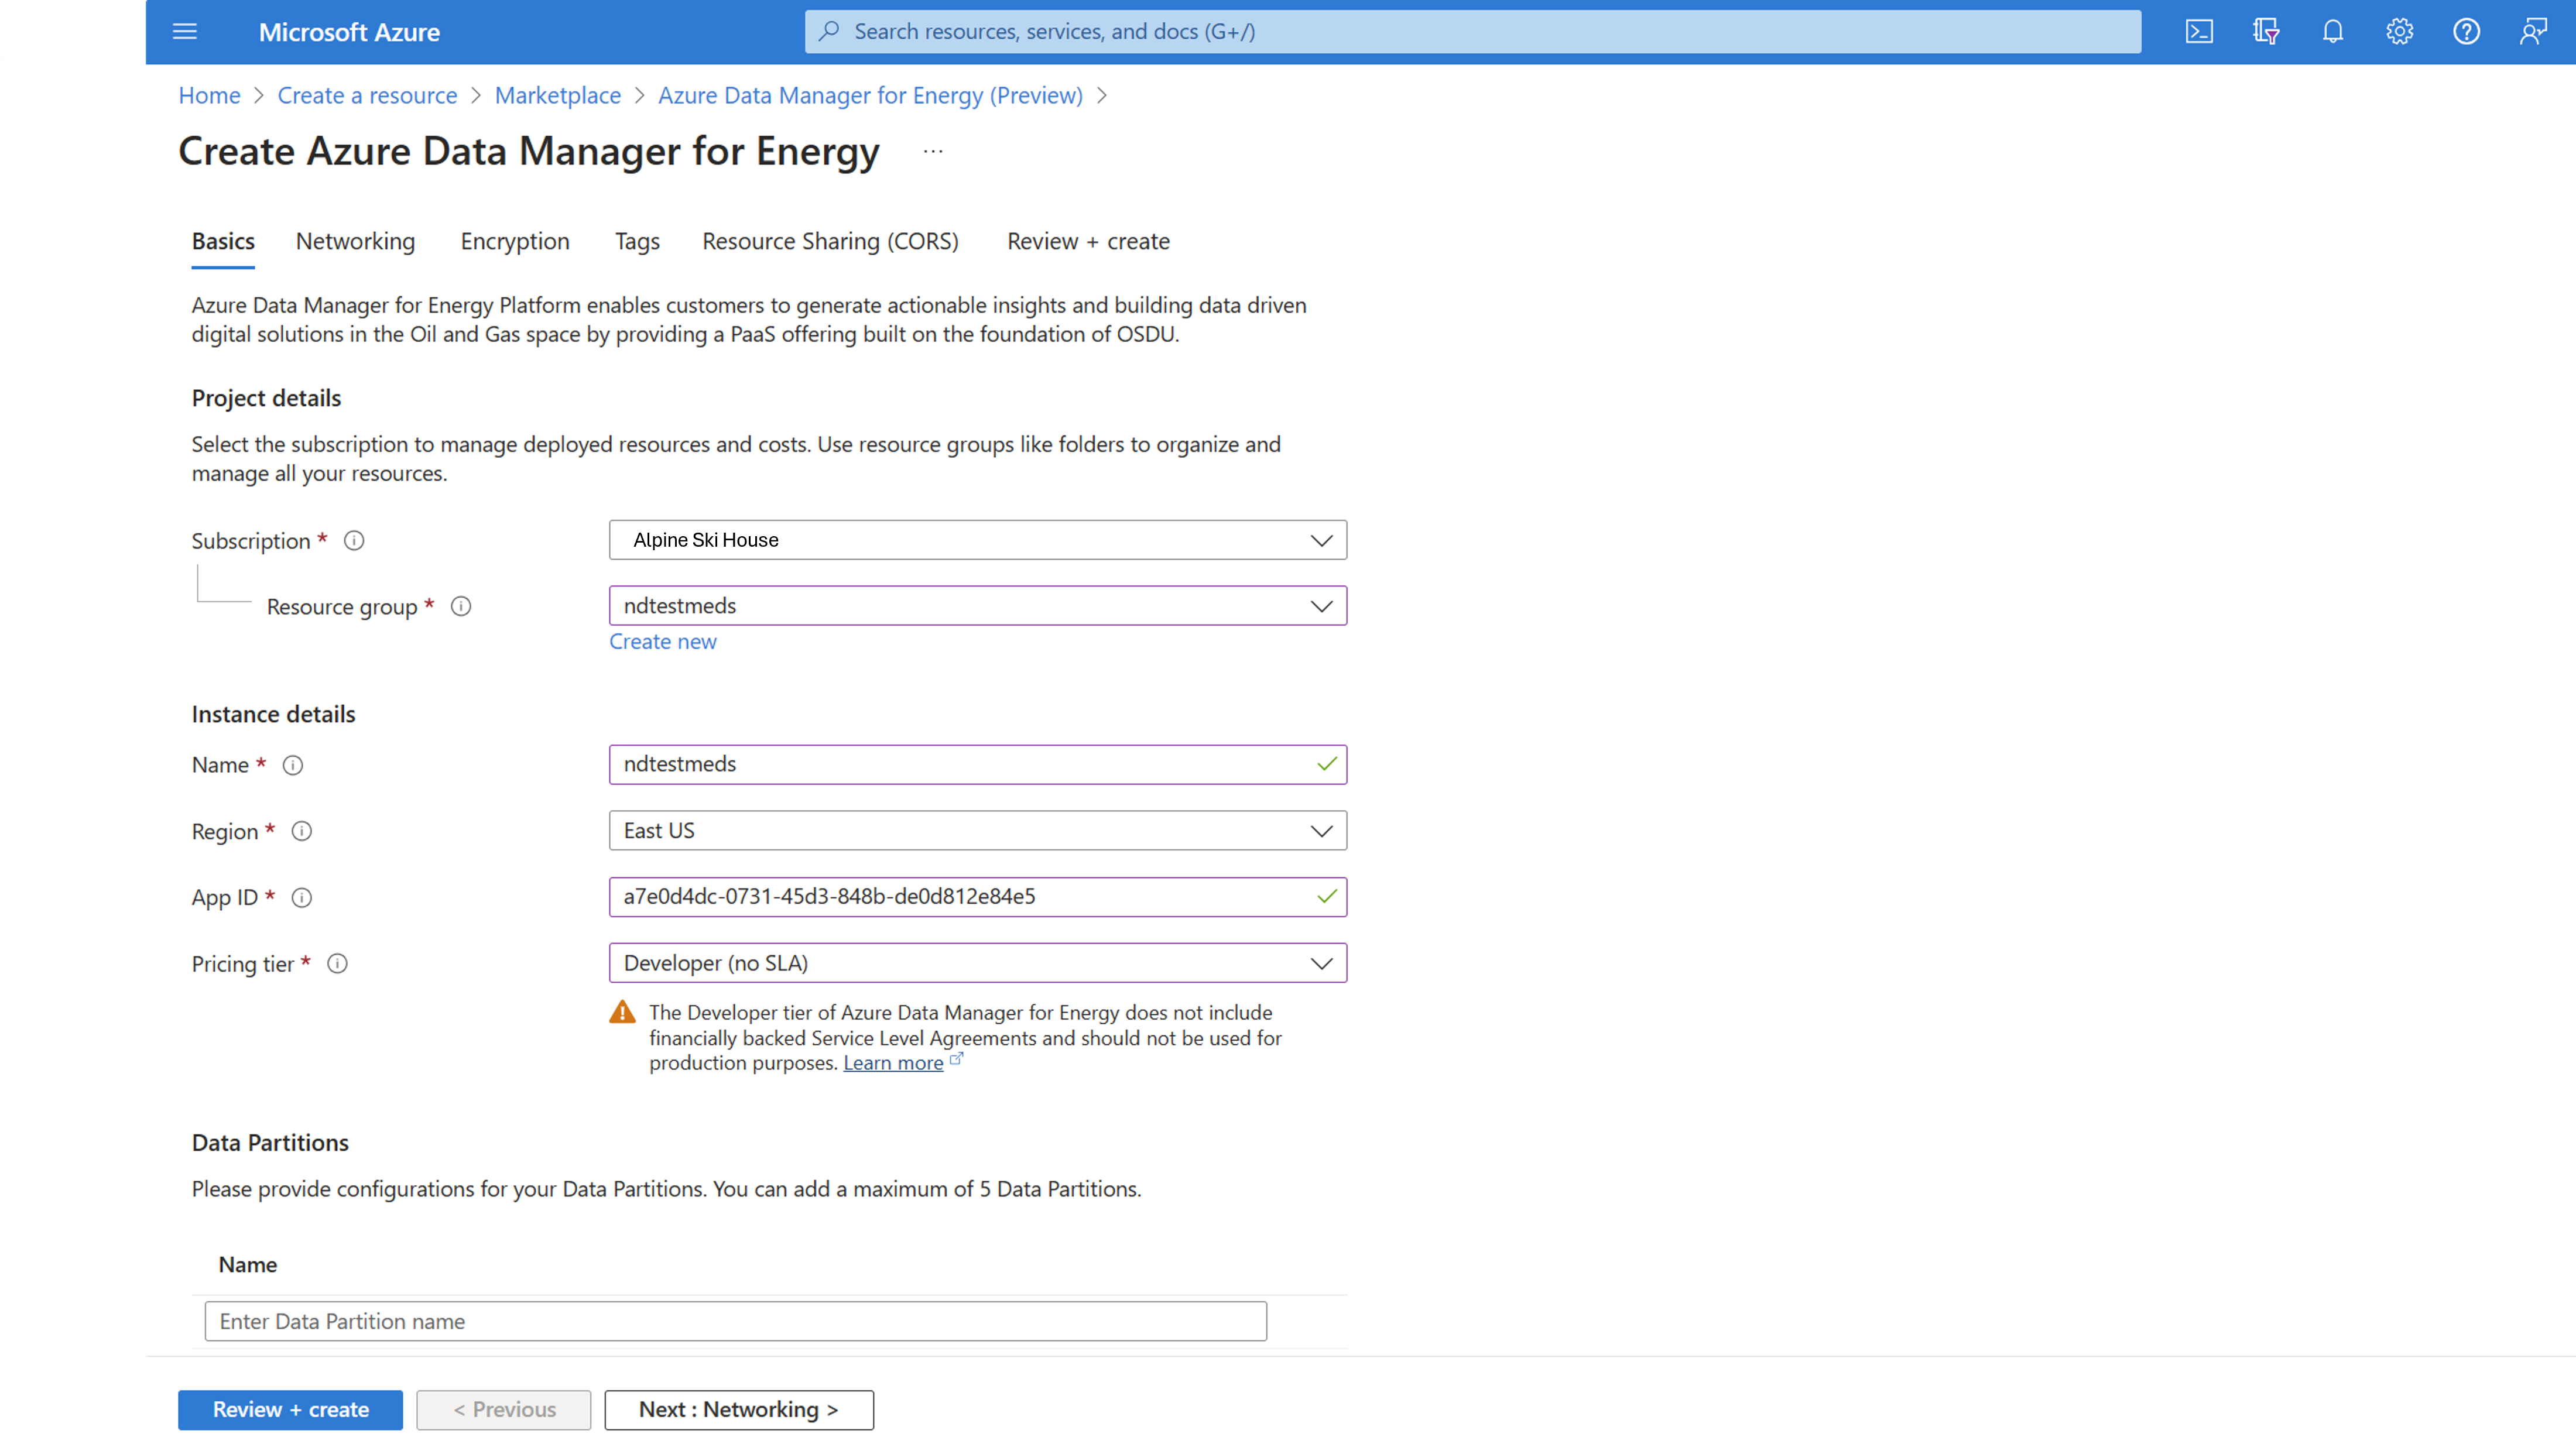 Screenshot of the basic details page after you select Create for Azure Data Manager for Energy. This page allows you to enter both instance and data partition details.